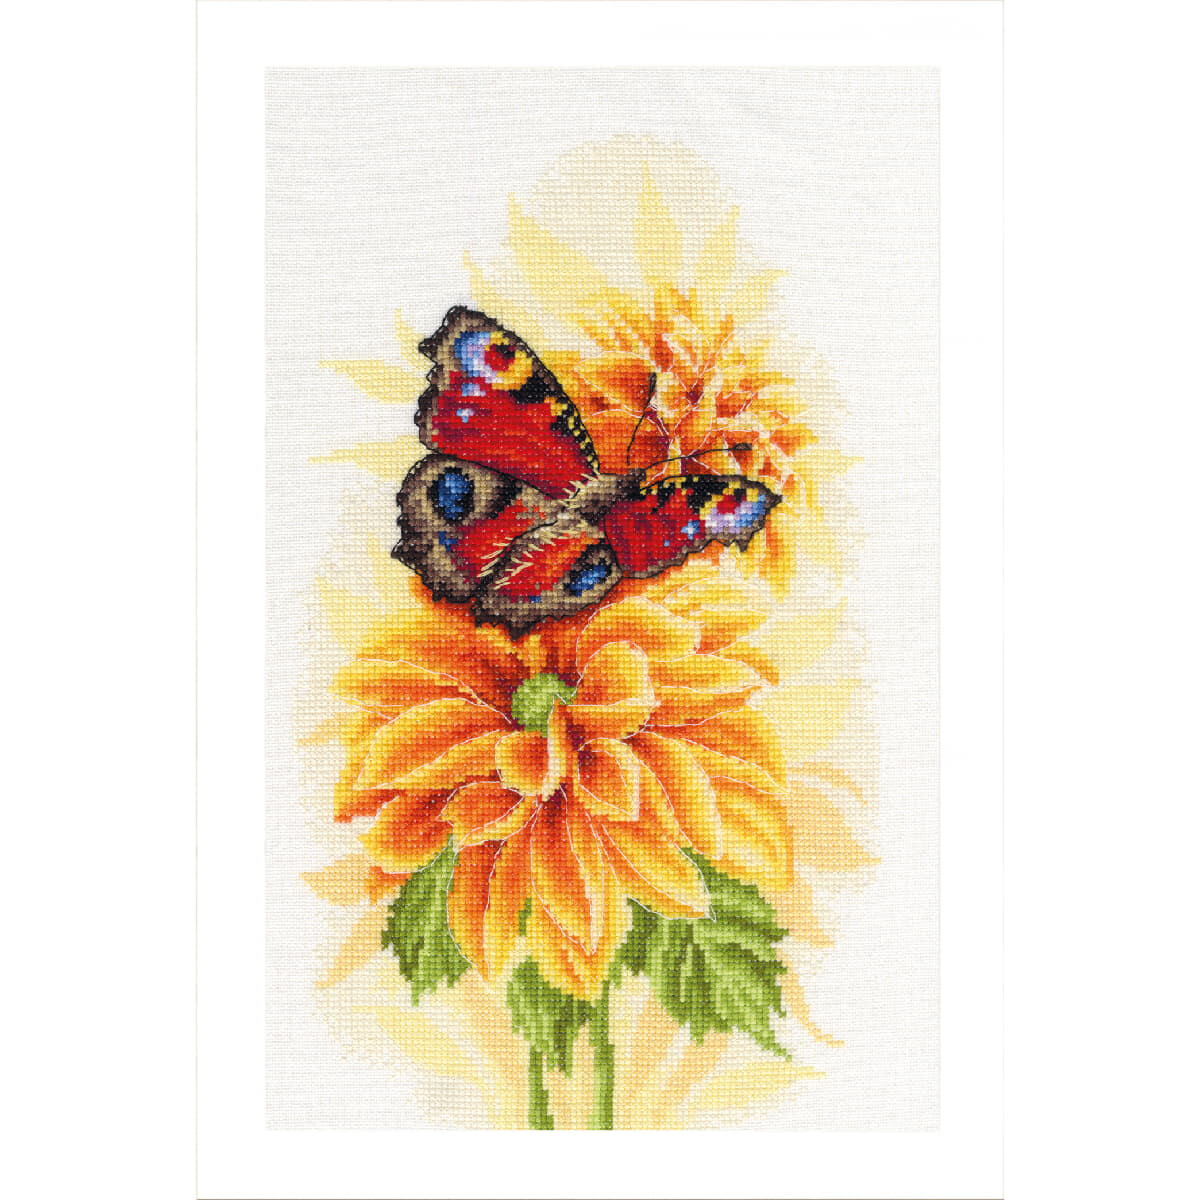 A colorful cross stitch pattern (Lanarte embroidery pack)...